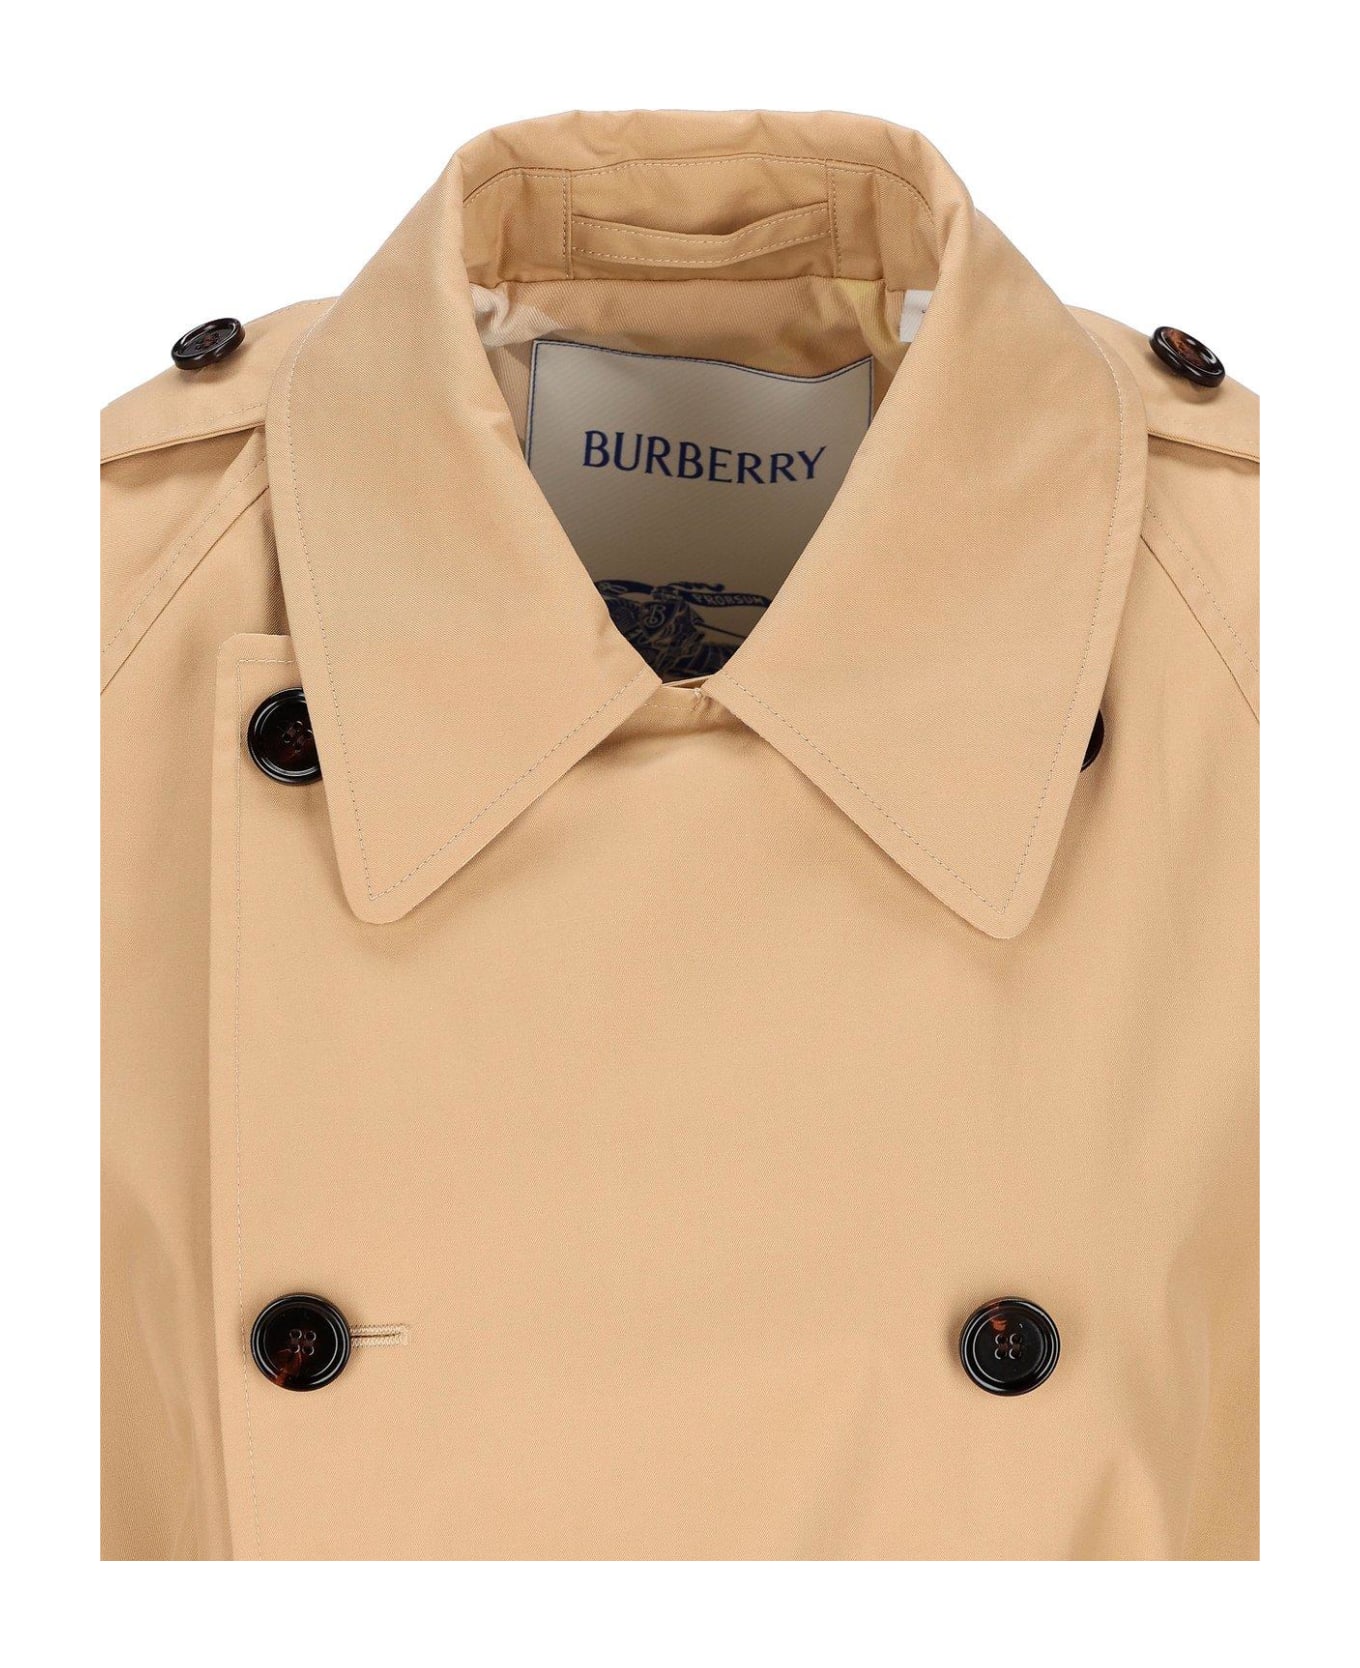 Burberry Double Breasted Belted Trench Coat - Flax